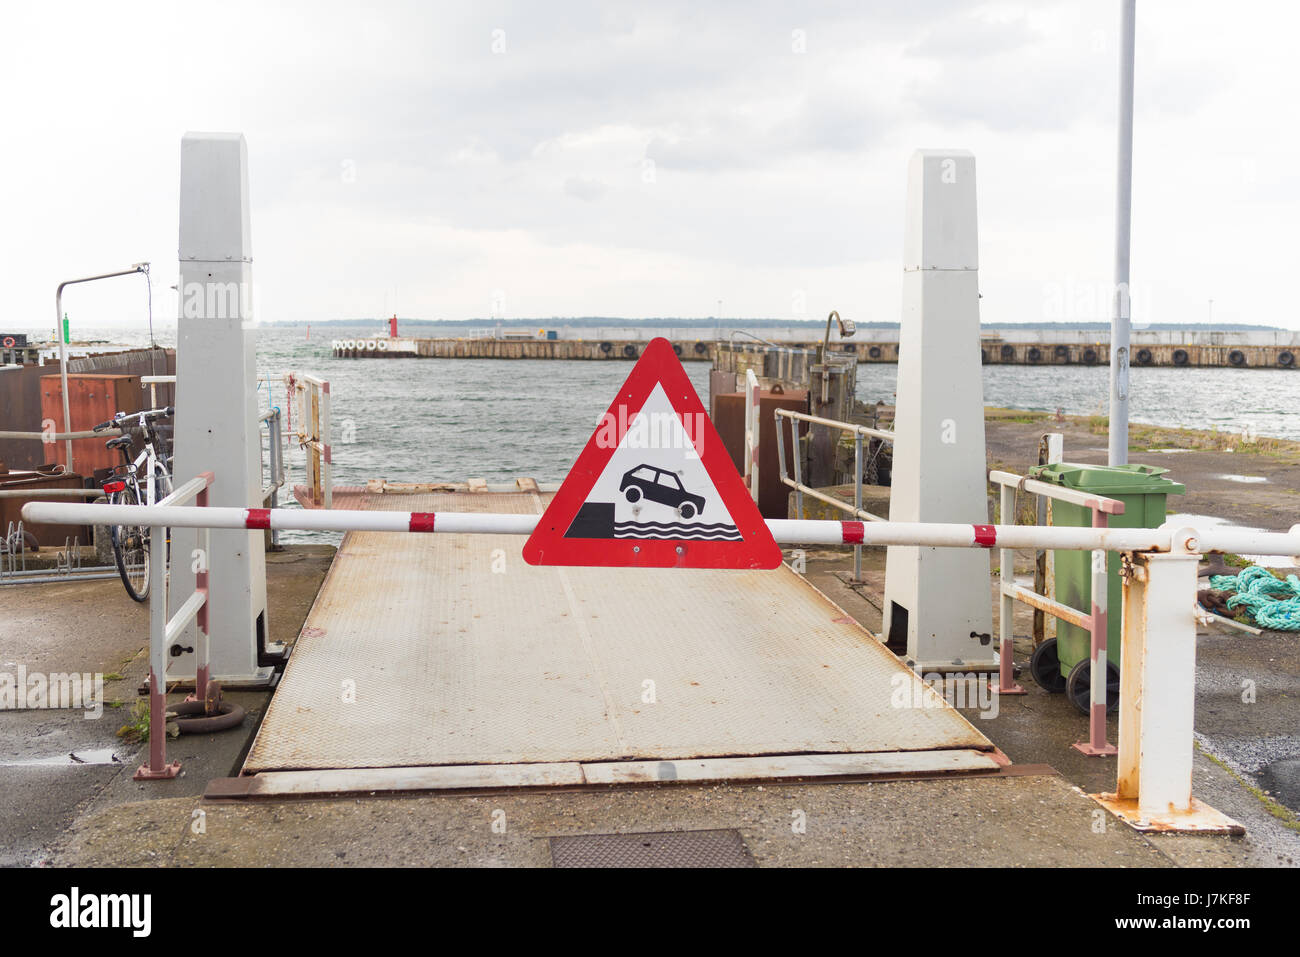 closed driveway to the Hundested - Roervig ferry boat in Denmark Stock Photo